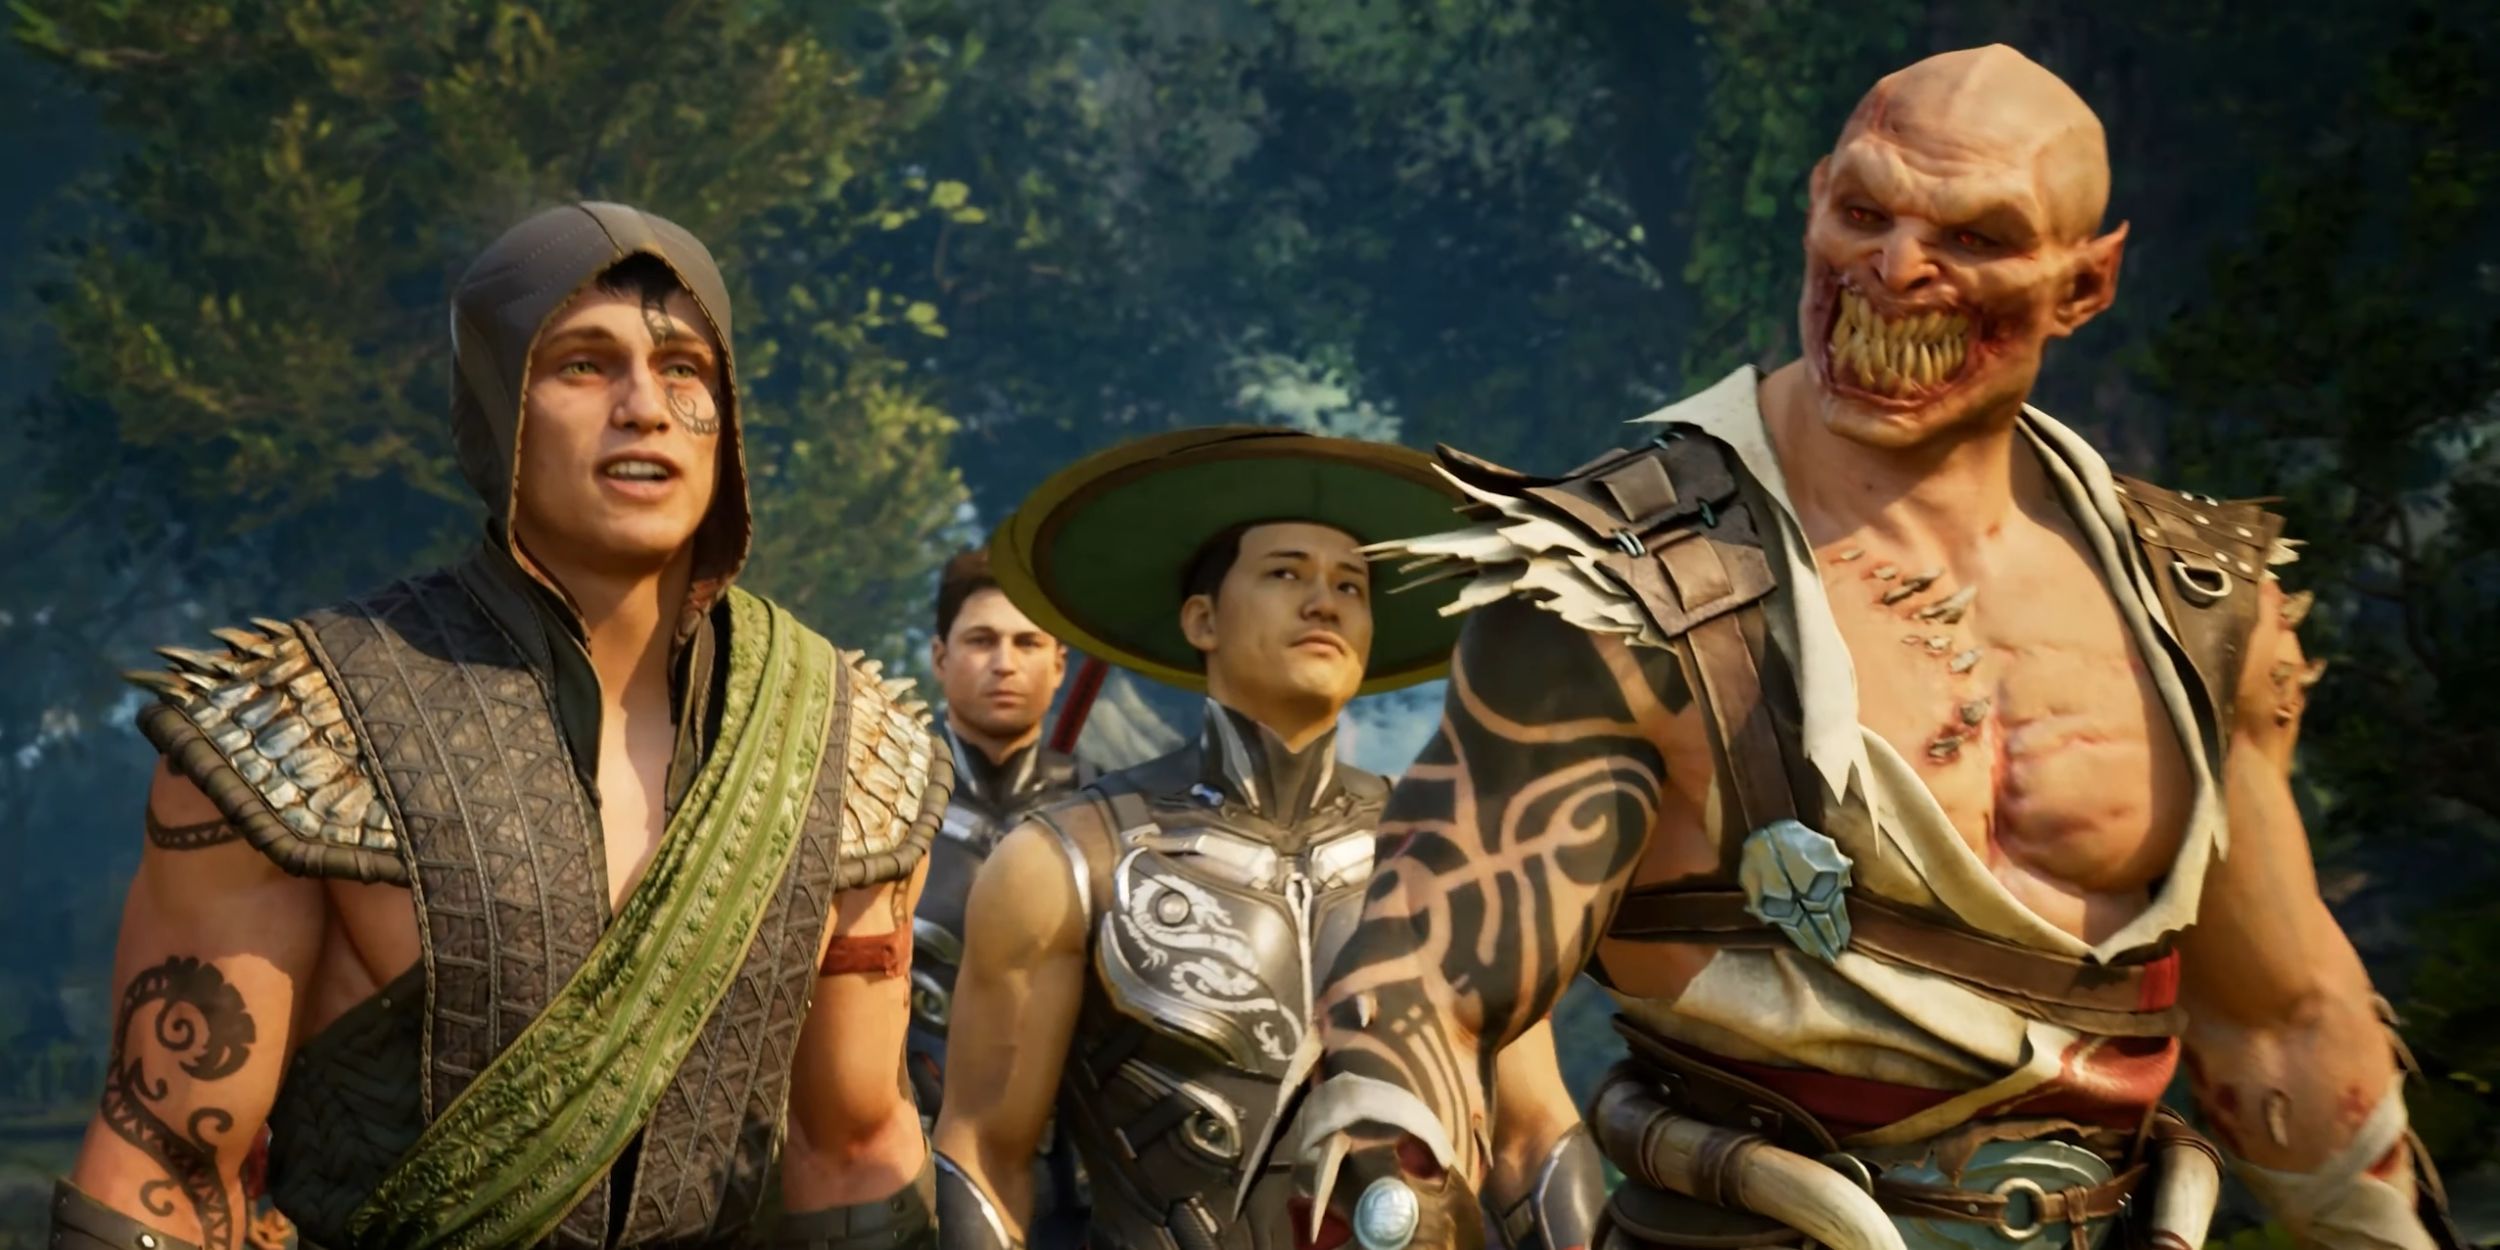 Mortal Kombat 1 launches tomorrow but without crossplay multiplayer support  - Neowin